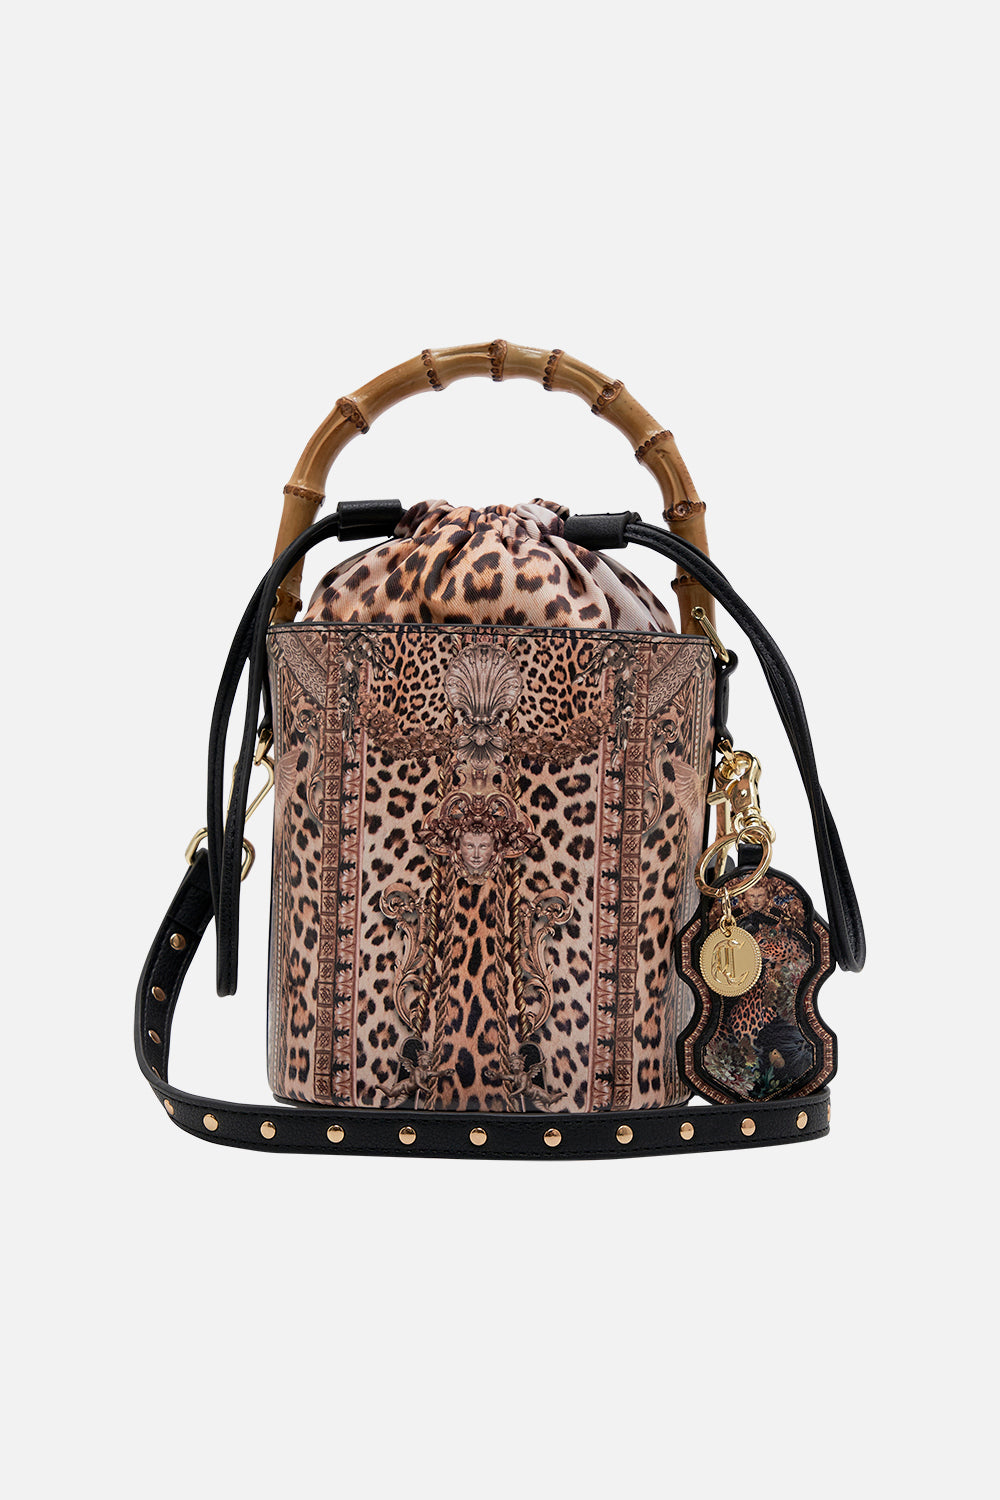 Product view of CAMILLA leopard print bucket bag in Standing Ovation print